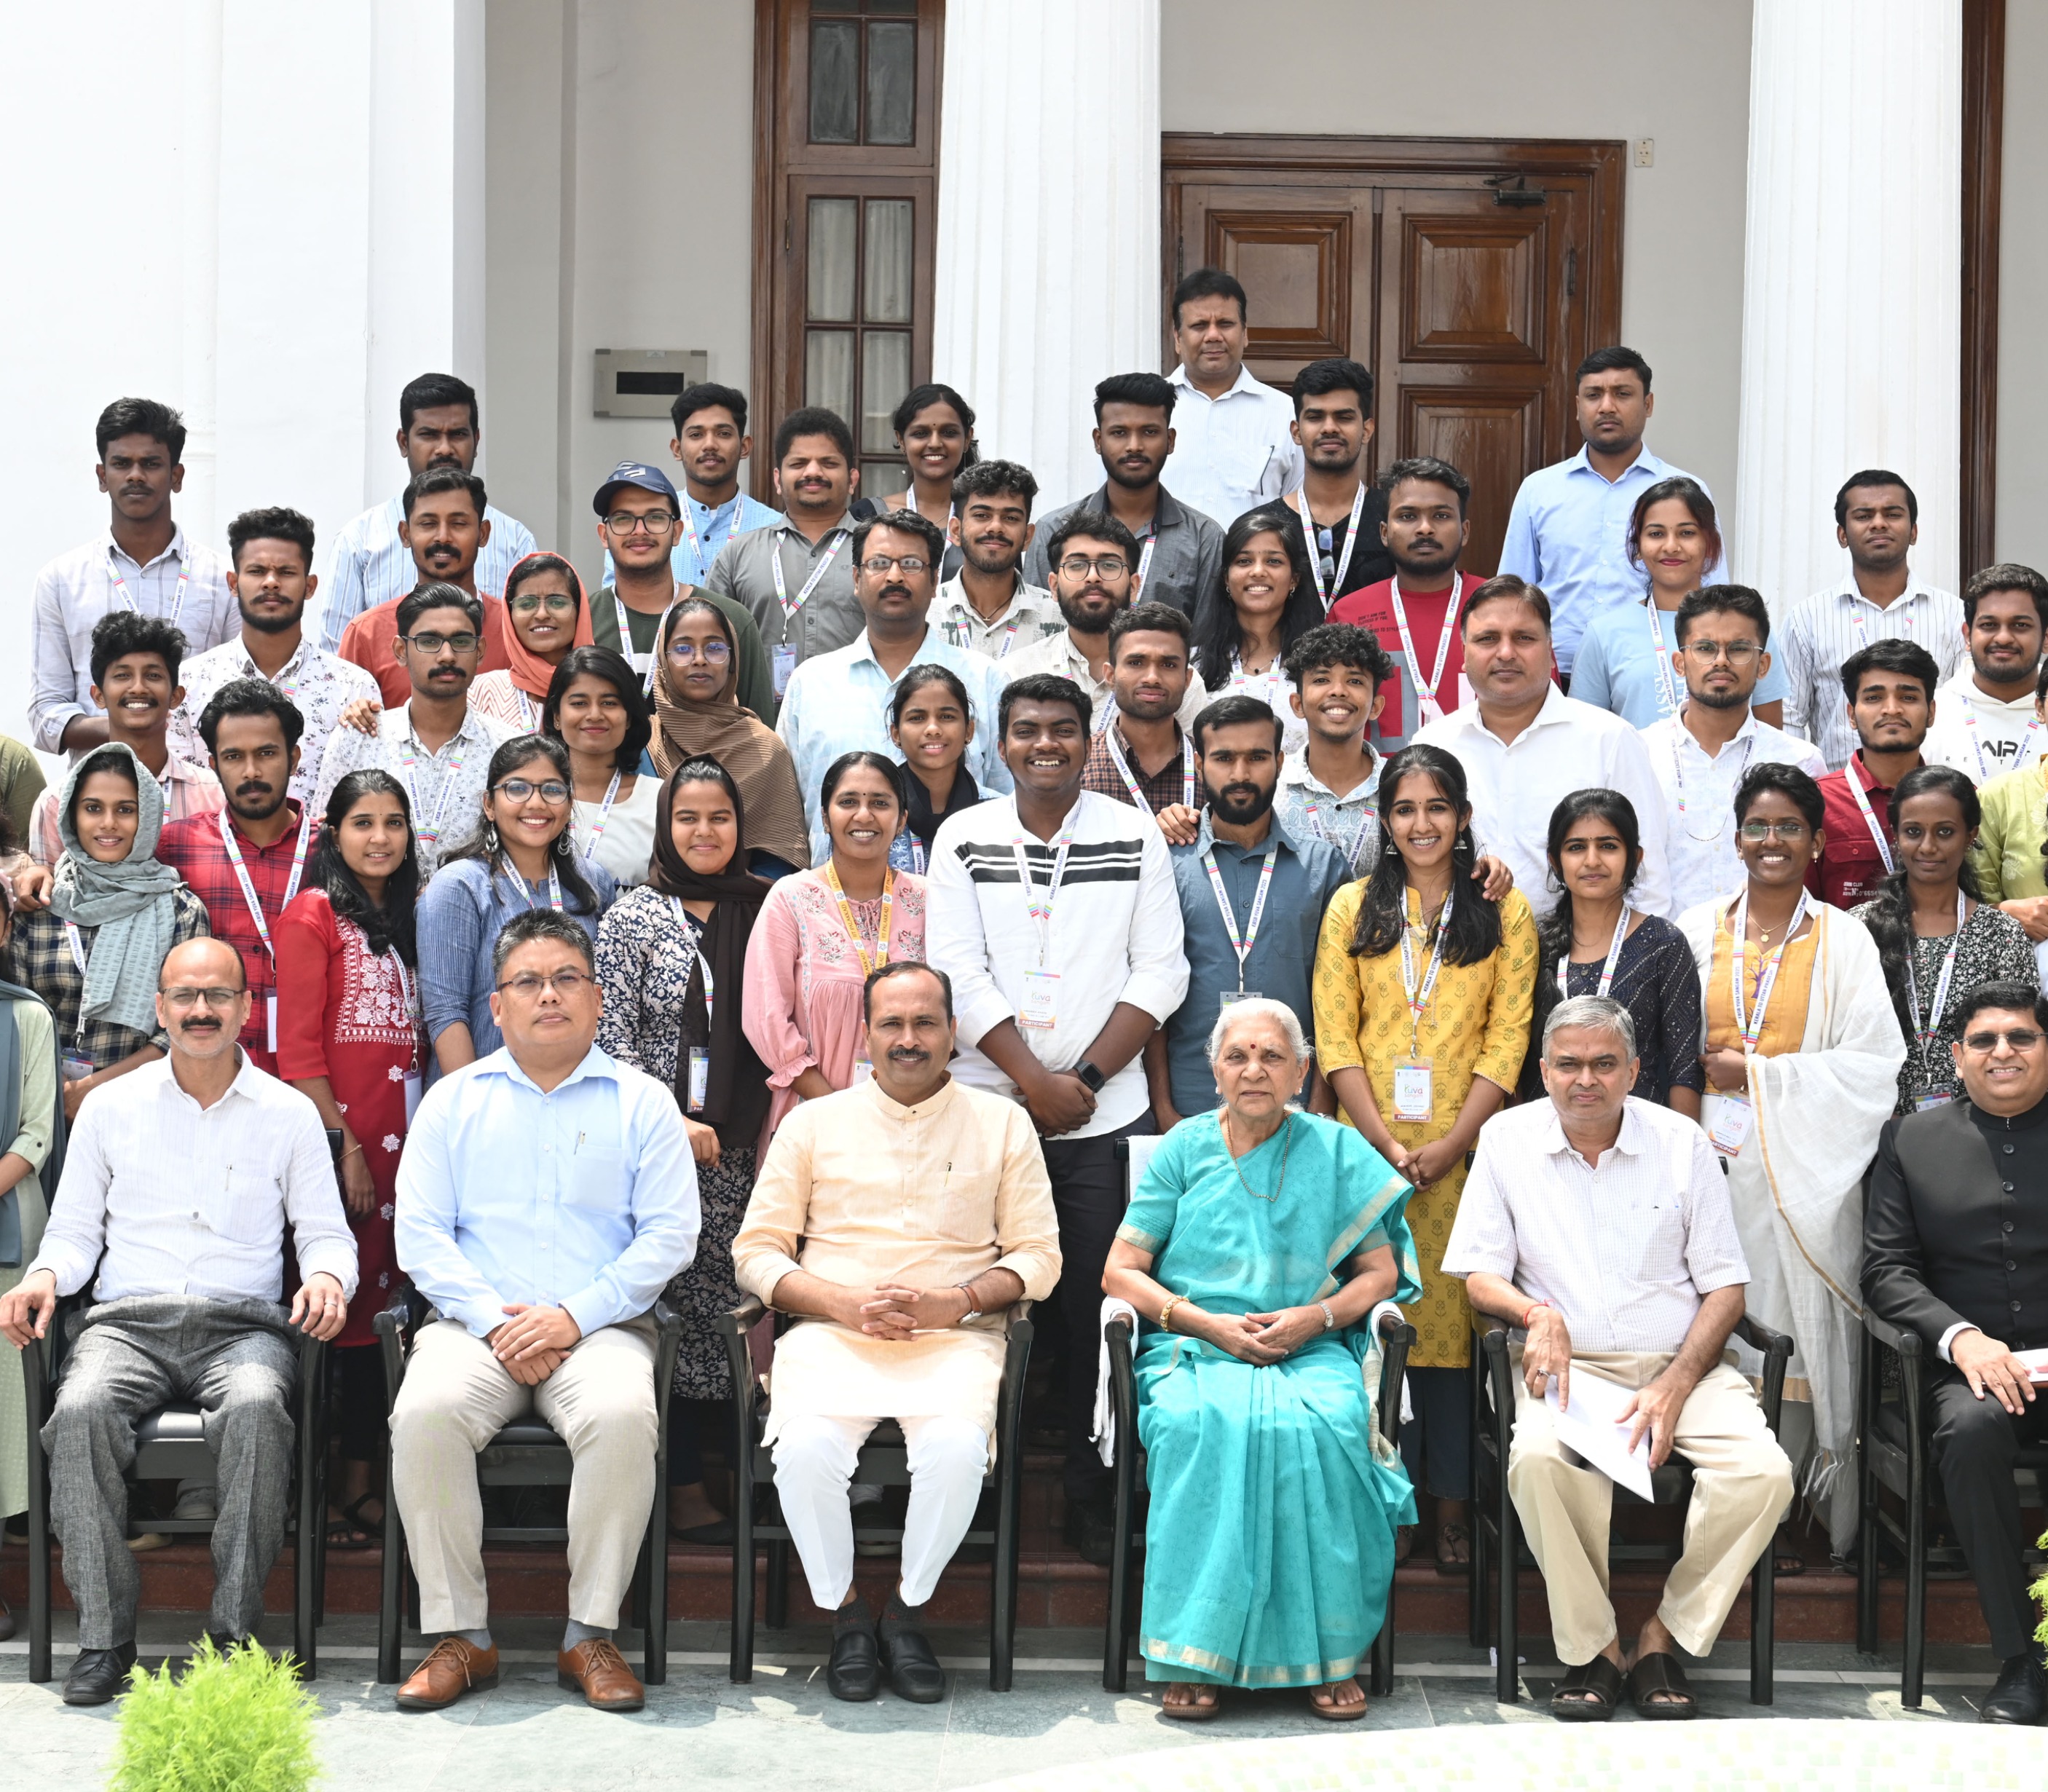 Students of Indian Institute of Technology Palakkad, Kerala met the Governor